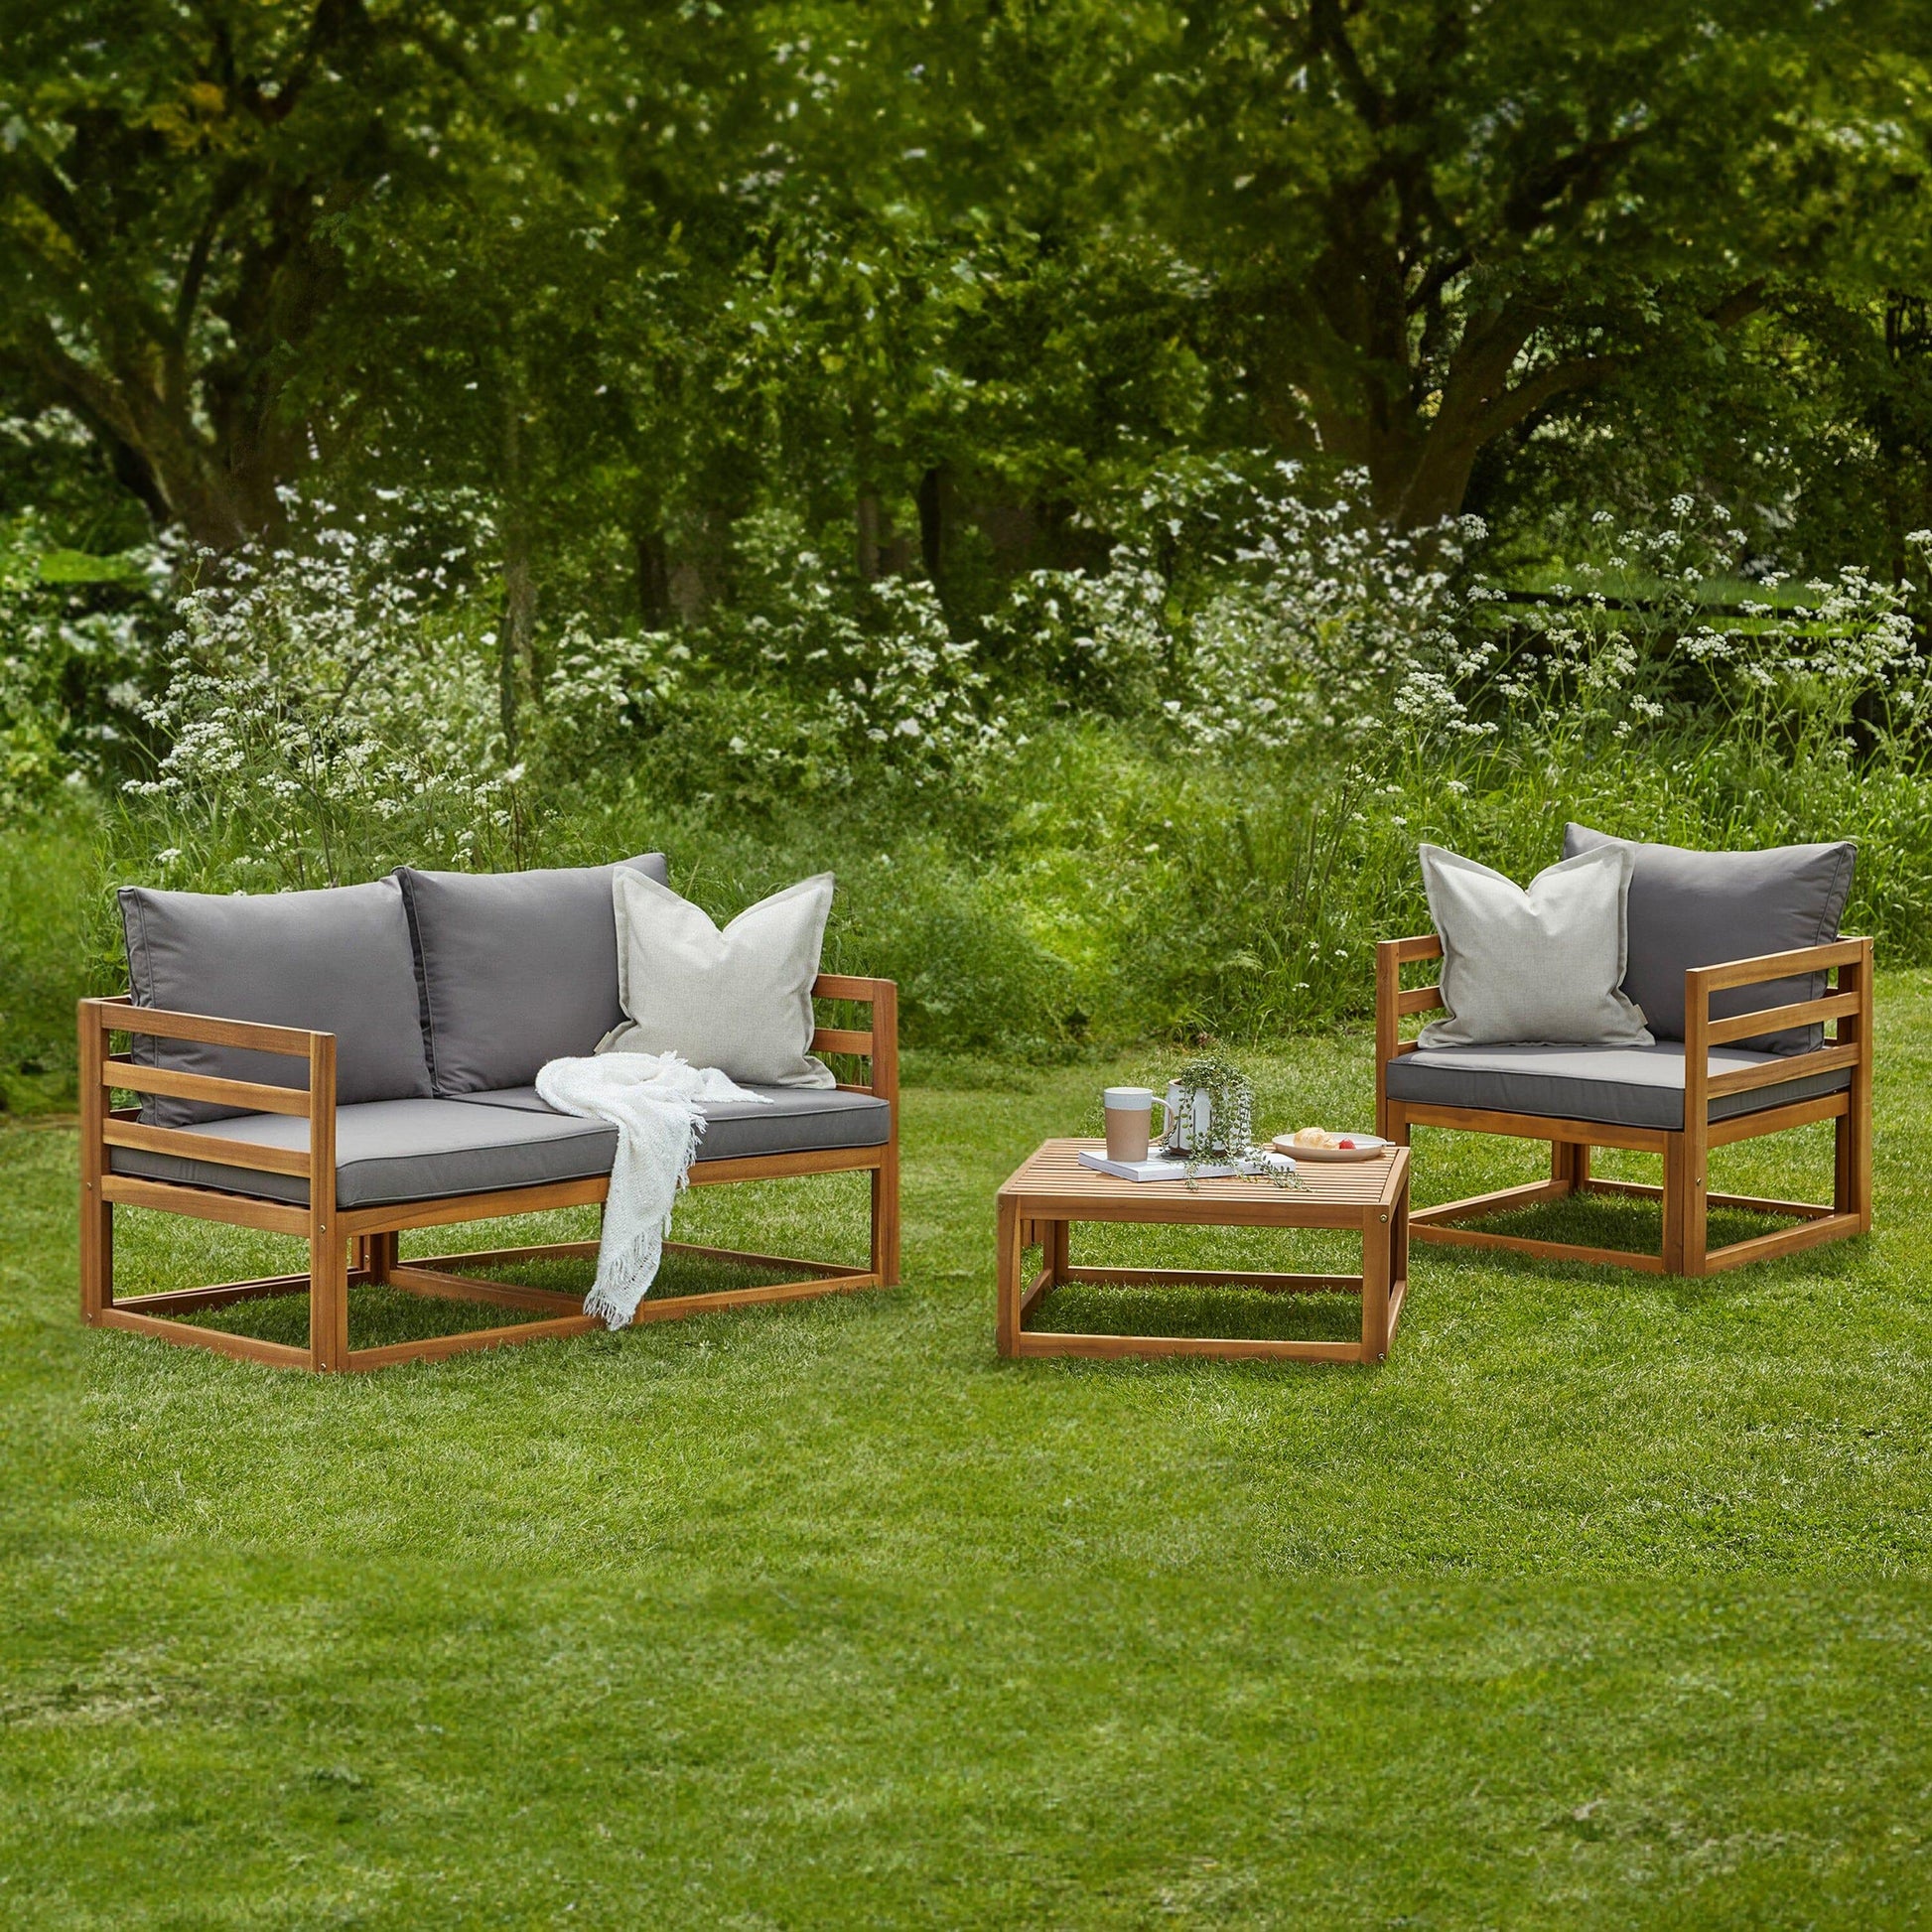 Rowan Outdoor Wooden Sofa Set With Armchair, 2 Seater Sofa and Coffee Table